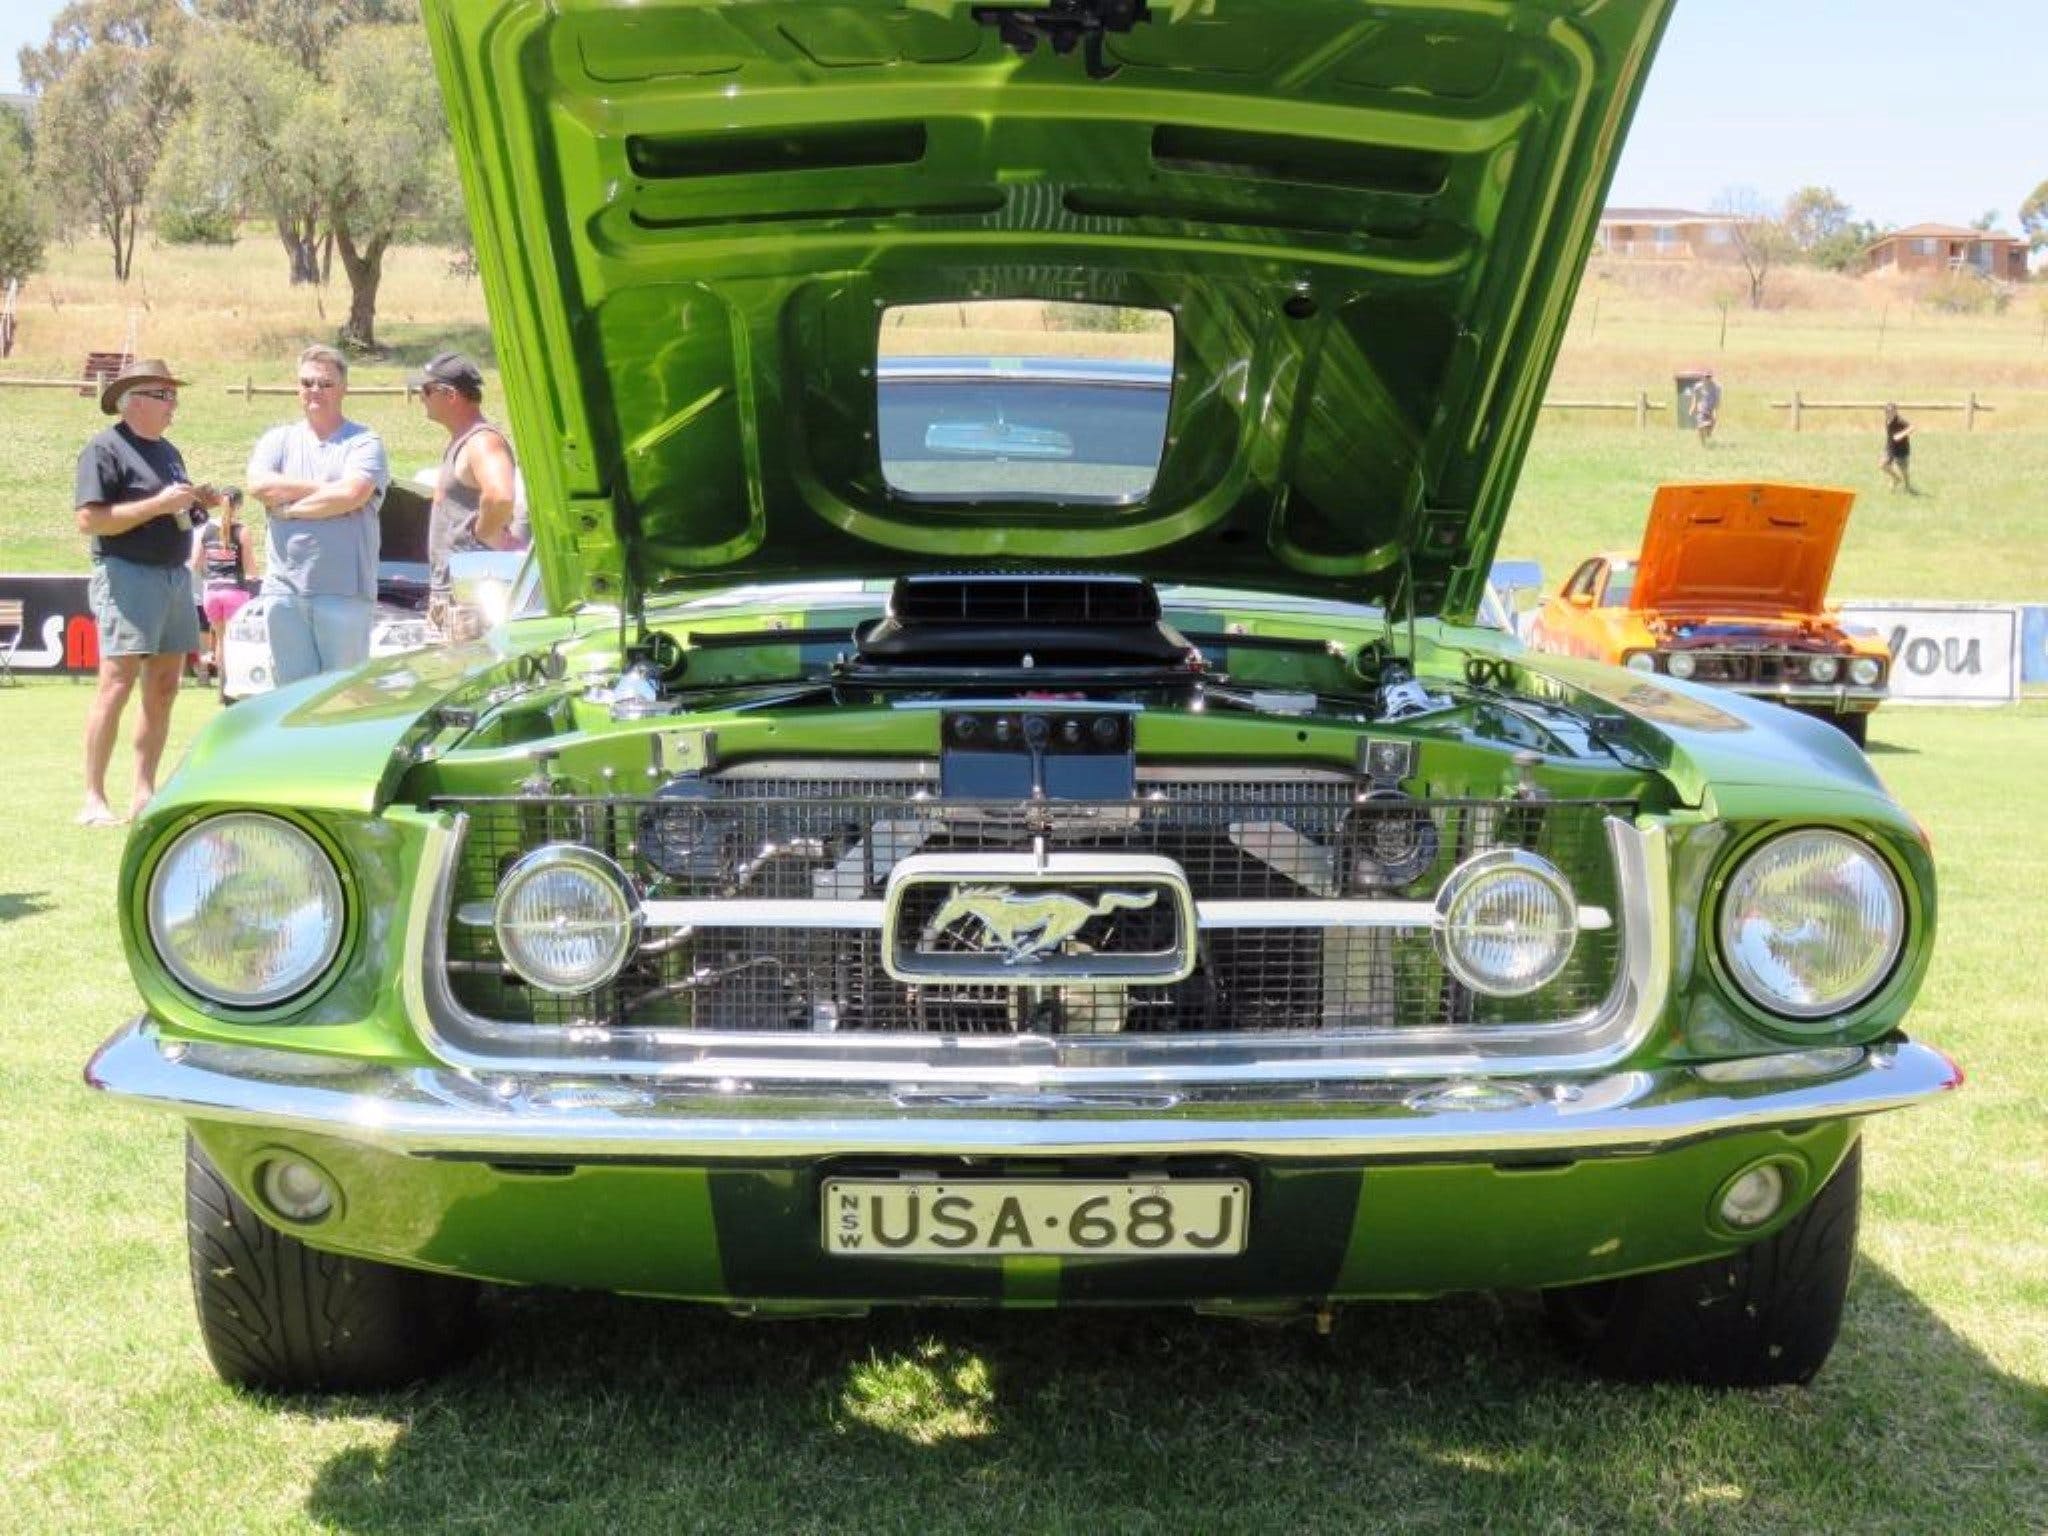 Central West Car Club Charity Show and Shine - WA Accommodation